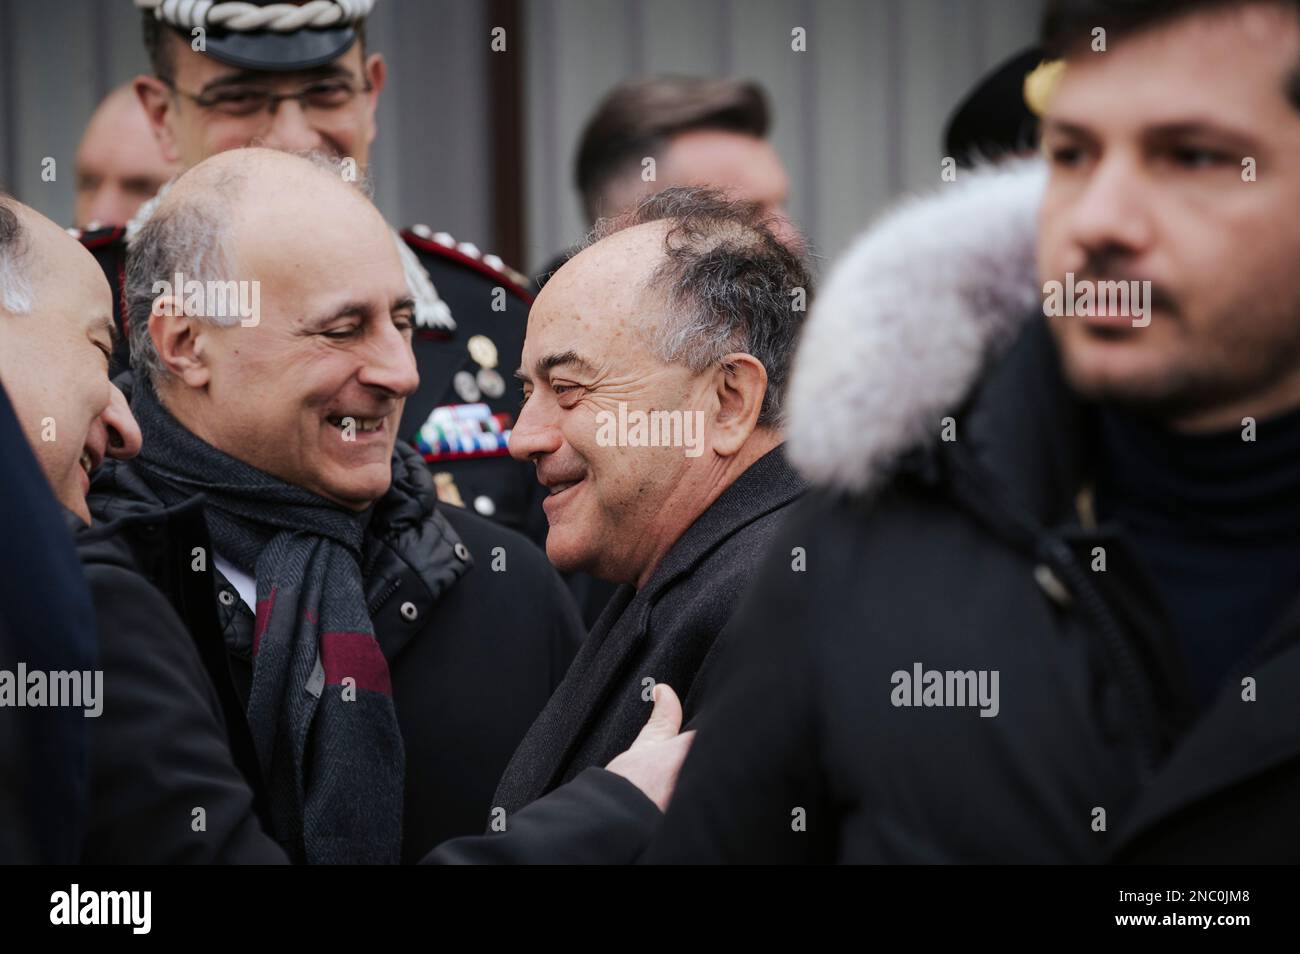 Catanzaro, Italy. 13th Feb, 2023. Nicola Gratteri(C), anti-mafia Public Prosecutor, seen greetings colleagues. Minister Piantedosi (C) seen talking among authorities. The Italian Minister of Interior Matteo Piantedosi attended the inauguration of the operative Anti-mafia Investigation Department (DIA - Direzione Investigativa Antimafia) The Minister also attended the provincial meeting for order and public security and the signature for a protocol for re-usage of buildings and assets seized from organise crime. Credit: SOPA Images Limited/Alamy Live News Stock Photo